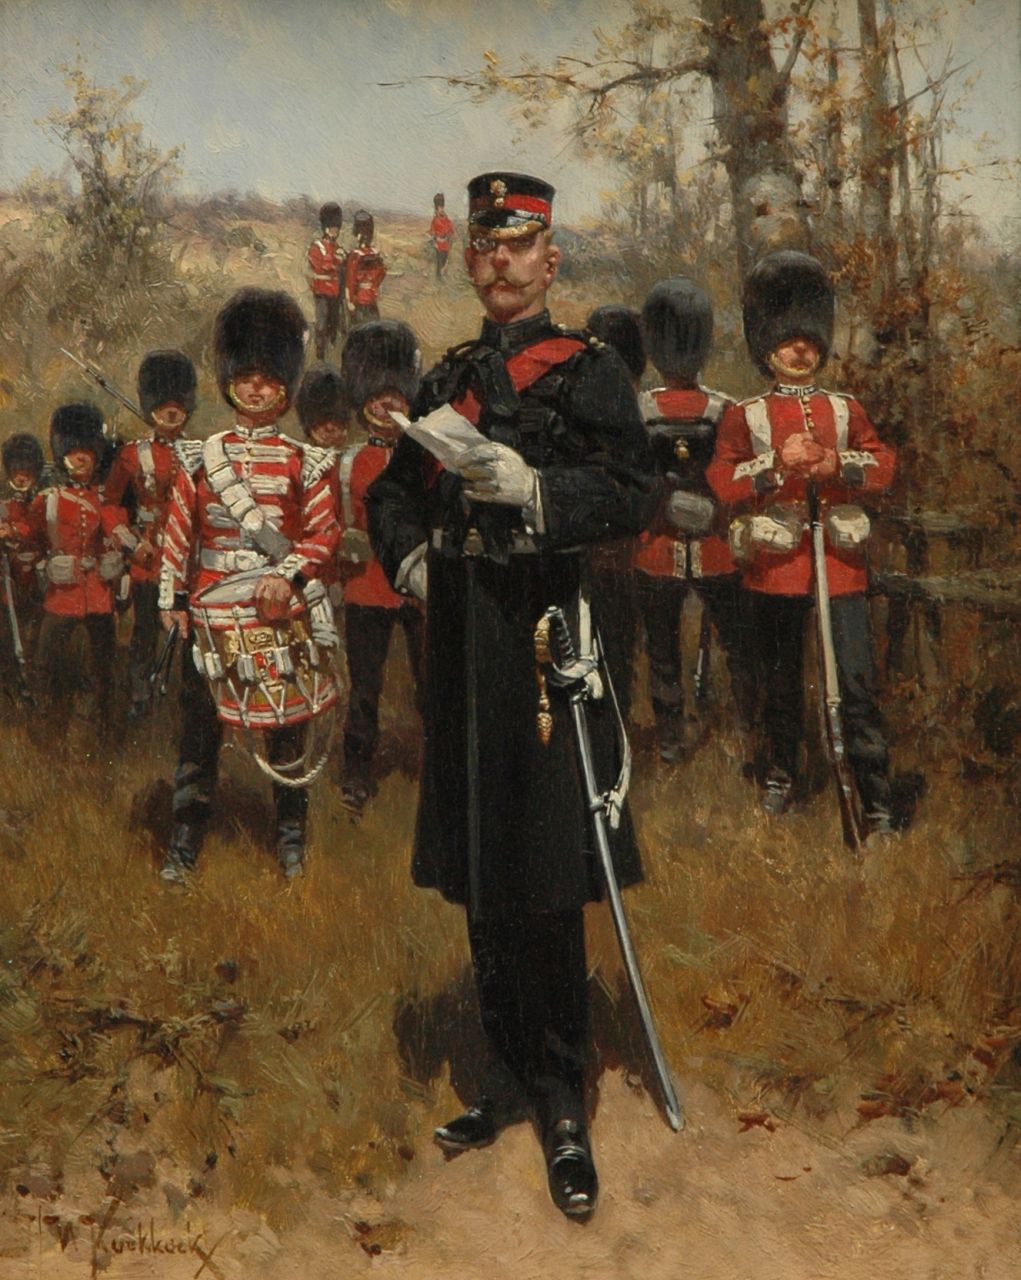 Hermanus Willem Koekkoek | The Grenadier Guards of the British army, oil on panel, 27.0 x 21.2 cm, signed l.l. and painted ca. 1898